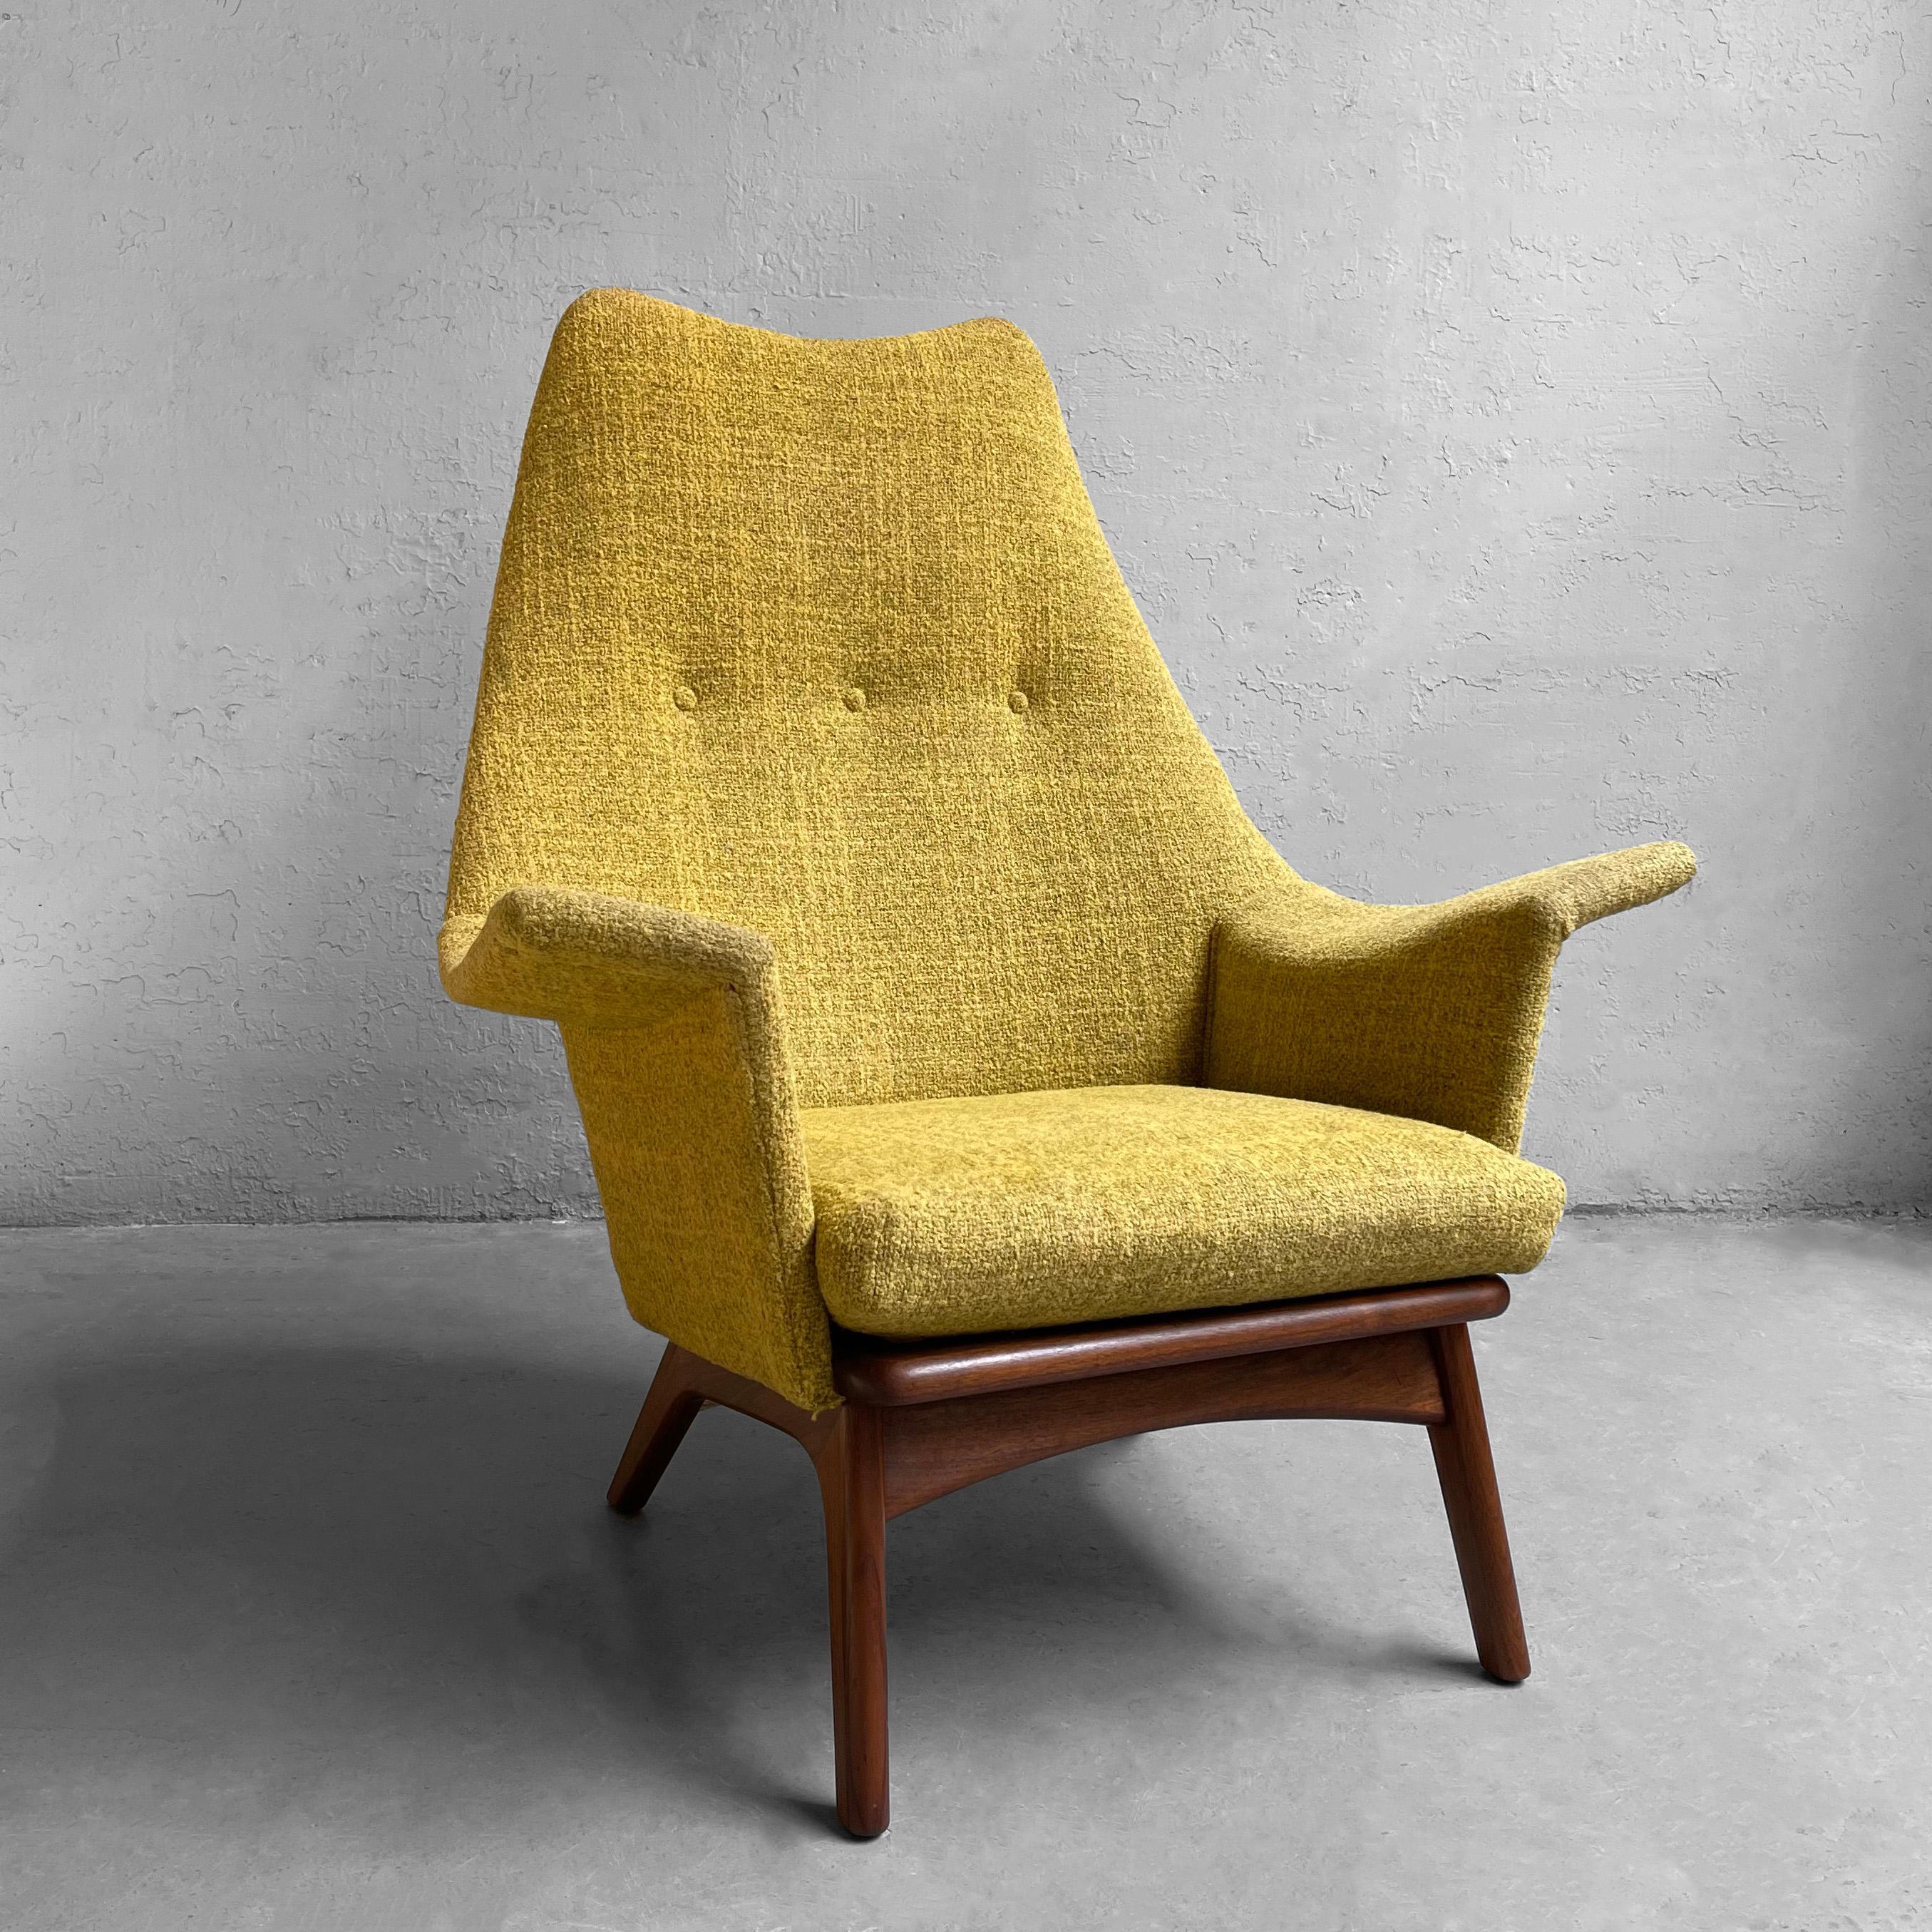 Adrian Pearsall for Craft Associates, sculptural, mid century modern take on a wingback chair is model 1611-C featuring a generous, cozy, high back, woven wool blend upholstered body with walnut base.